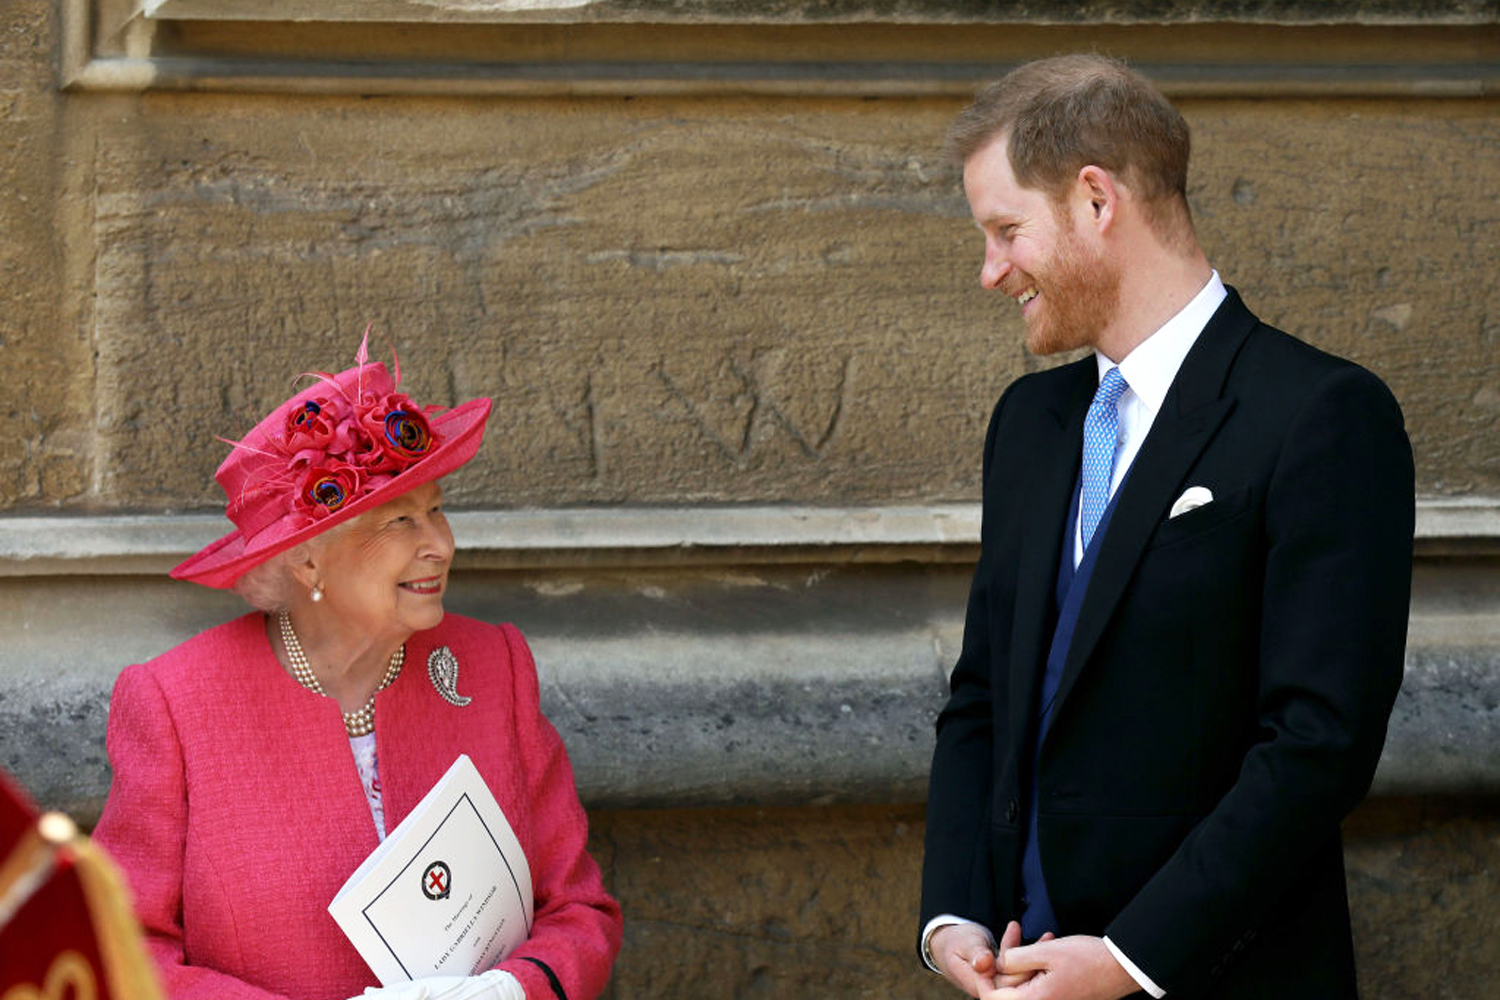 The Queen Is Still Prince Harry’s “Mentor” And Their Relationship Is Unchanged Since The Royal Exit